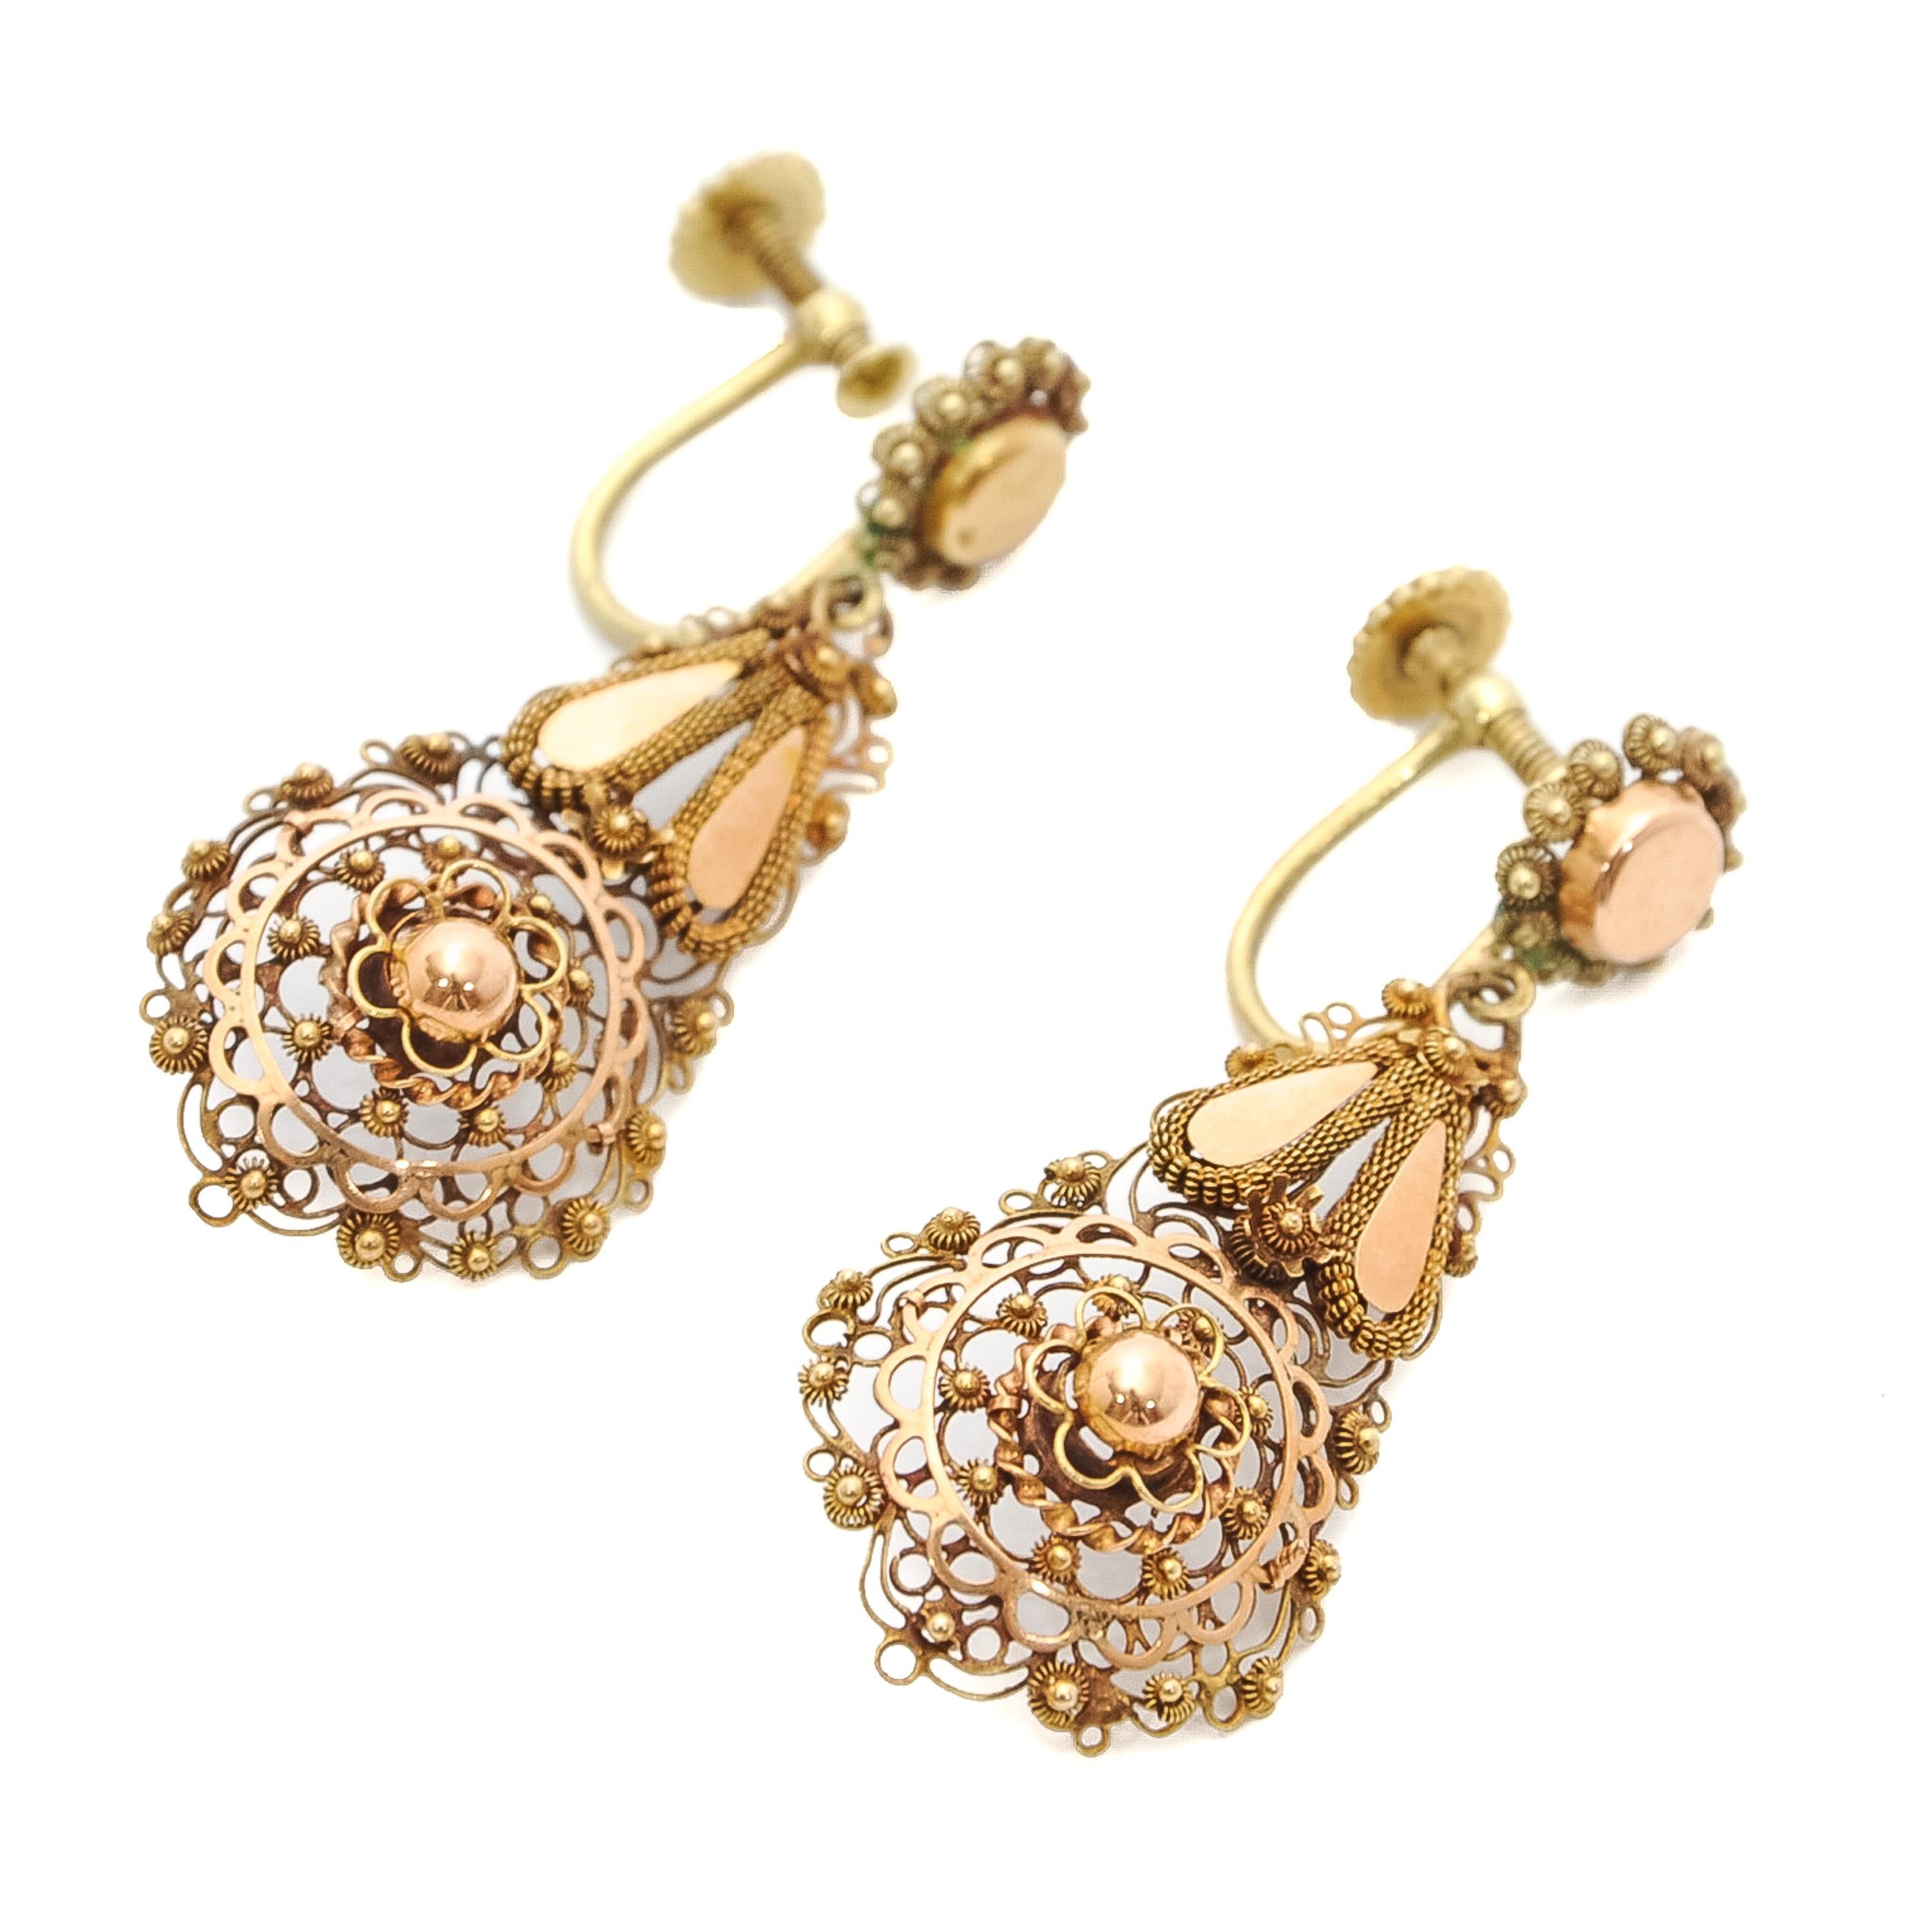 These antique 14 karat rose gold dangle earrings are beautifully handcrafted with an openwork filigree and cannetille work design. The earrings are skillfully handcrafted which gives the impression of fine lace. They are characterized by their